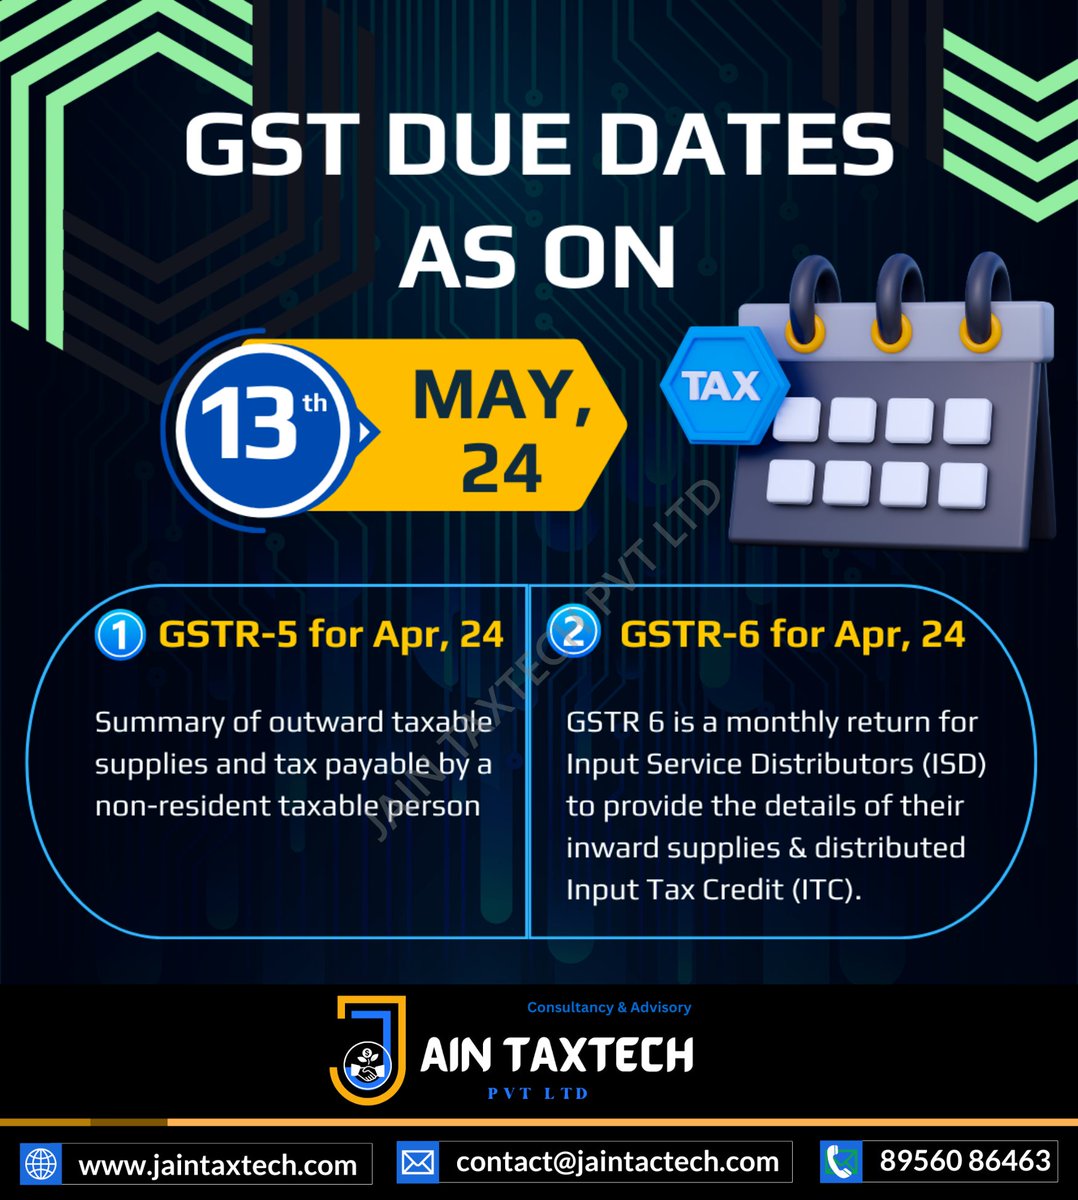 Attention Non-Resident Taxable Persons! 🌐 It's time to file your GSTR-5 for summarizing outward taxable supplies and tax payable. Ensure accurate reporting and compliance with Jain TaxTech! 💼💳 #GSTR5 #TaxCompliance #NonResident #JainTaxTech #GSTCompliance #TaxFiling #GSTIndia